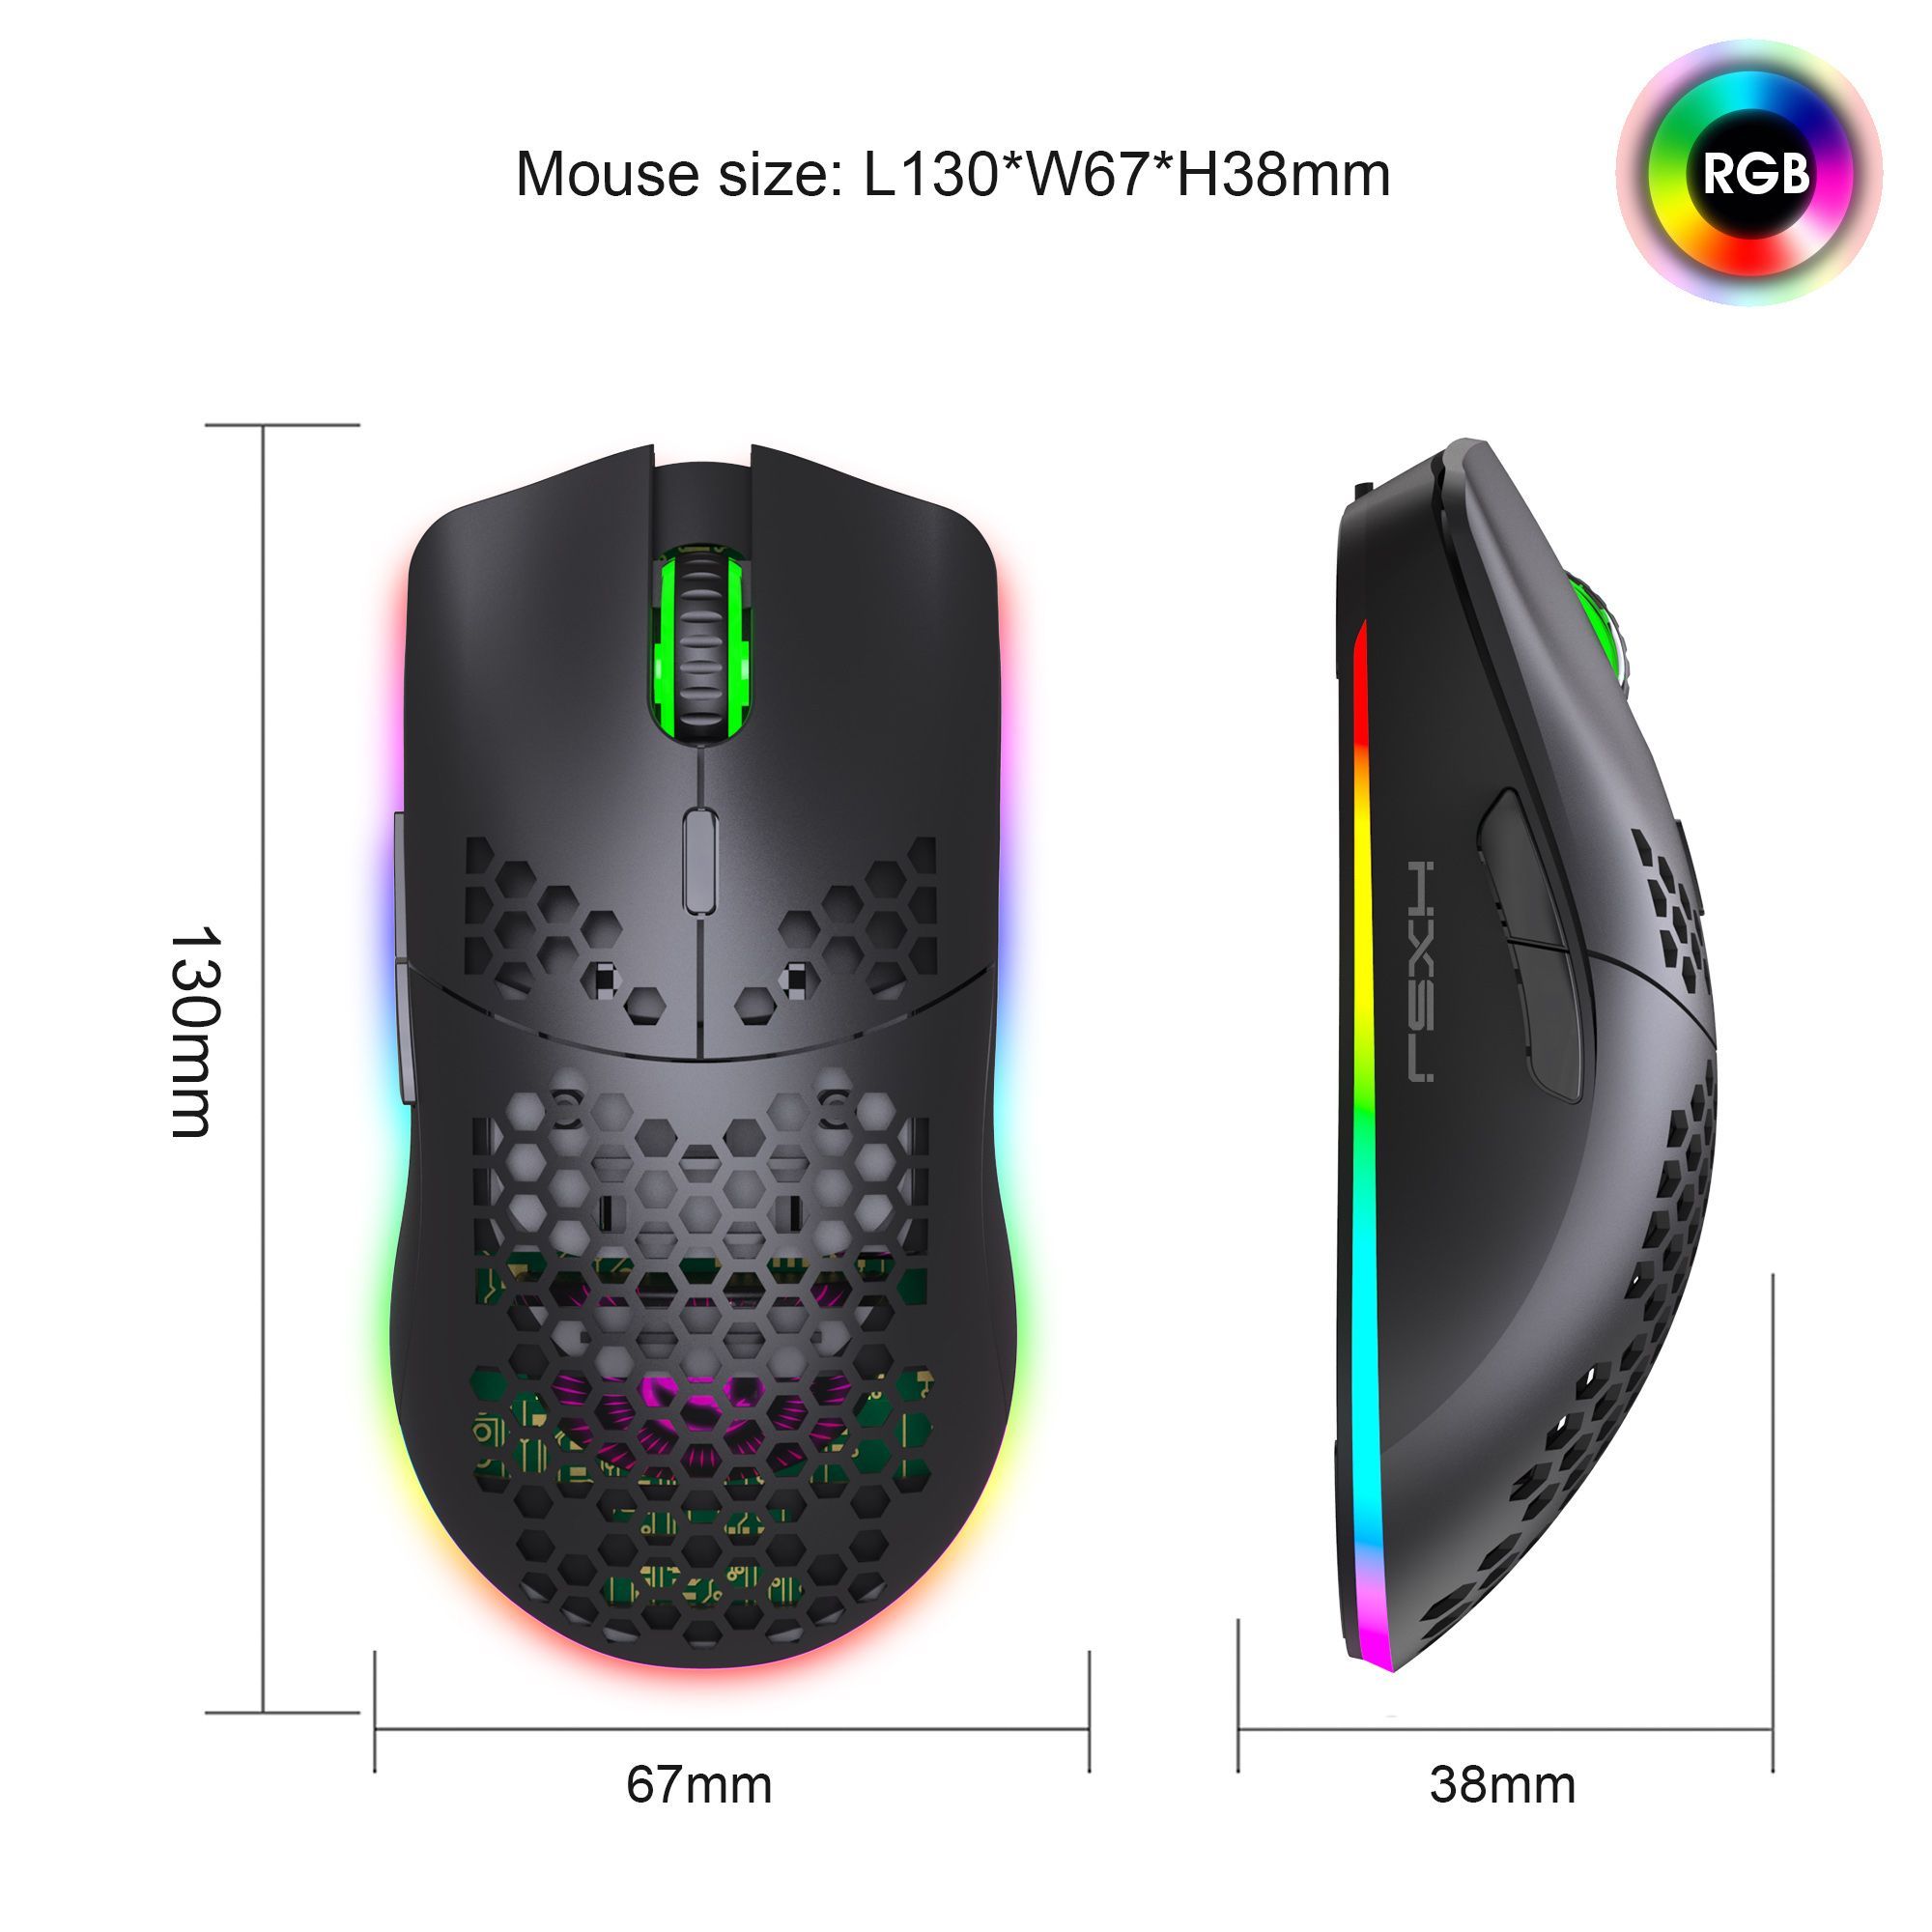 HXSJ-T66-Wireless-Mouse-24Ghz-Wireless-Honeycomb-Lightweight-Design-RGB-Lighting-Mouse-Rechargeable--1761494